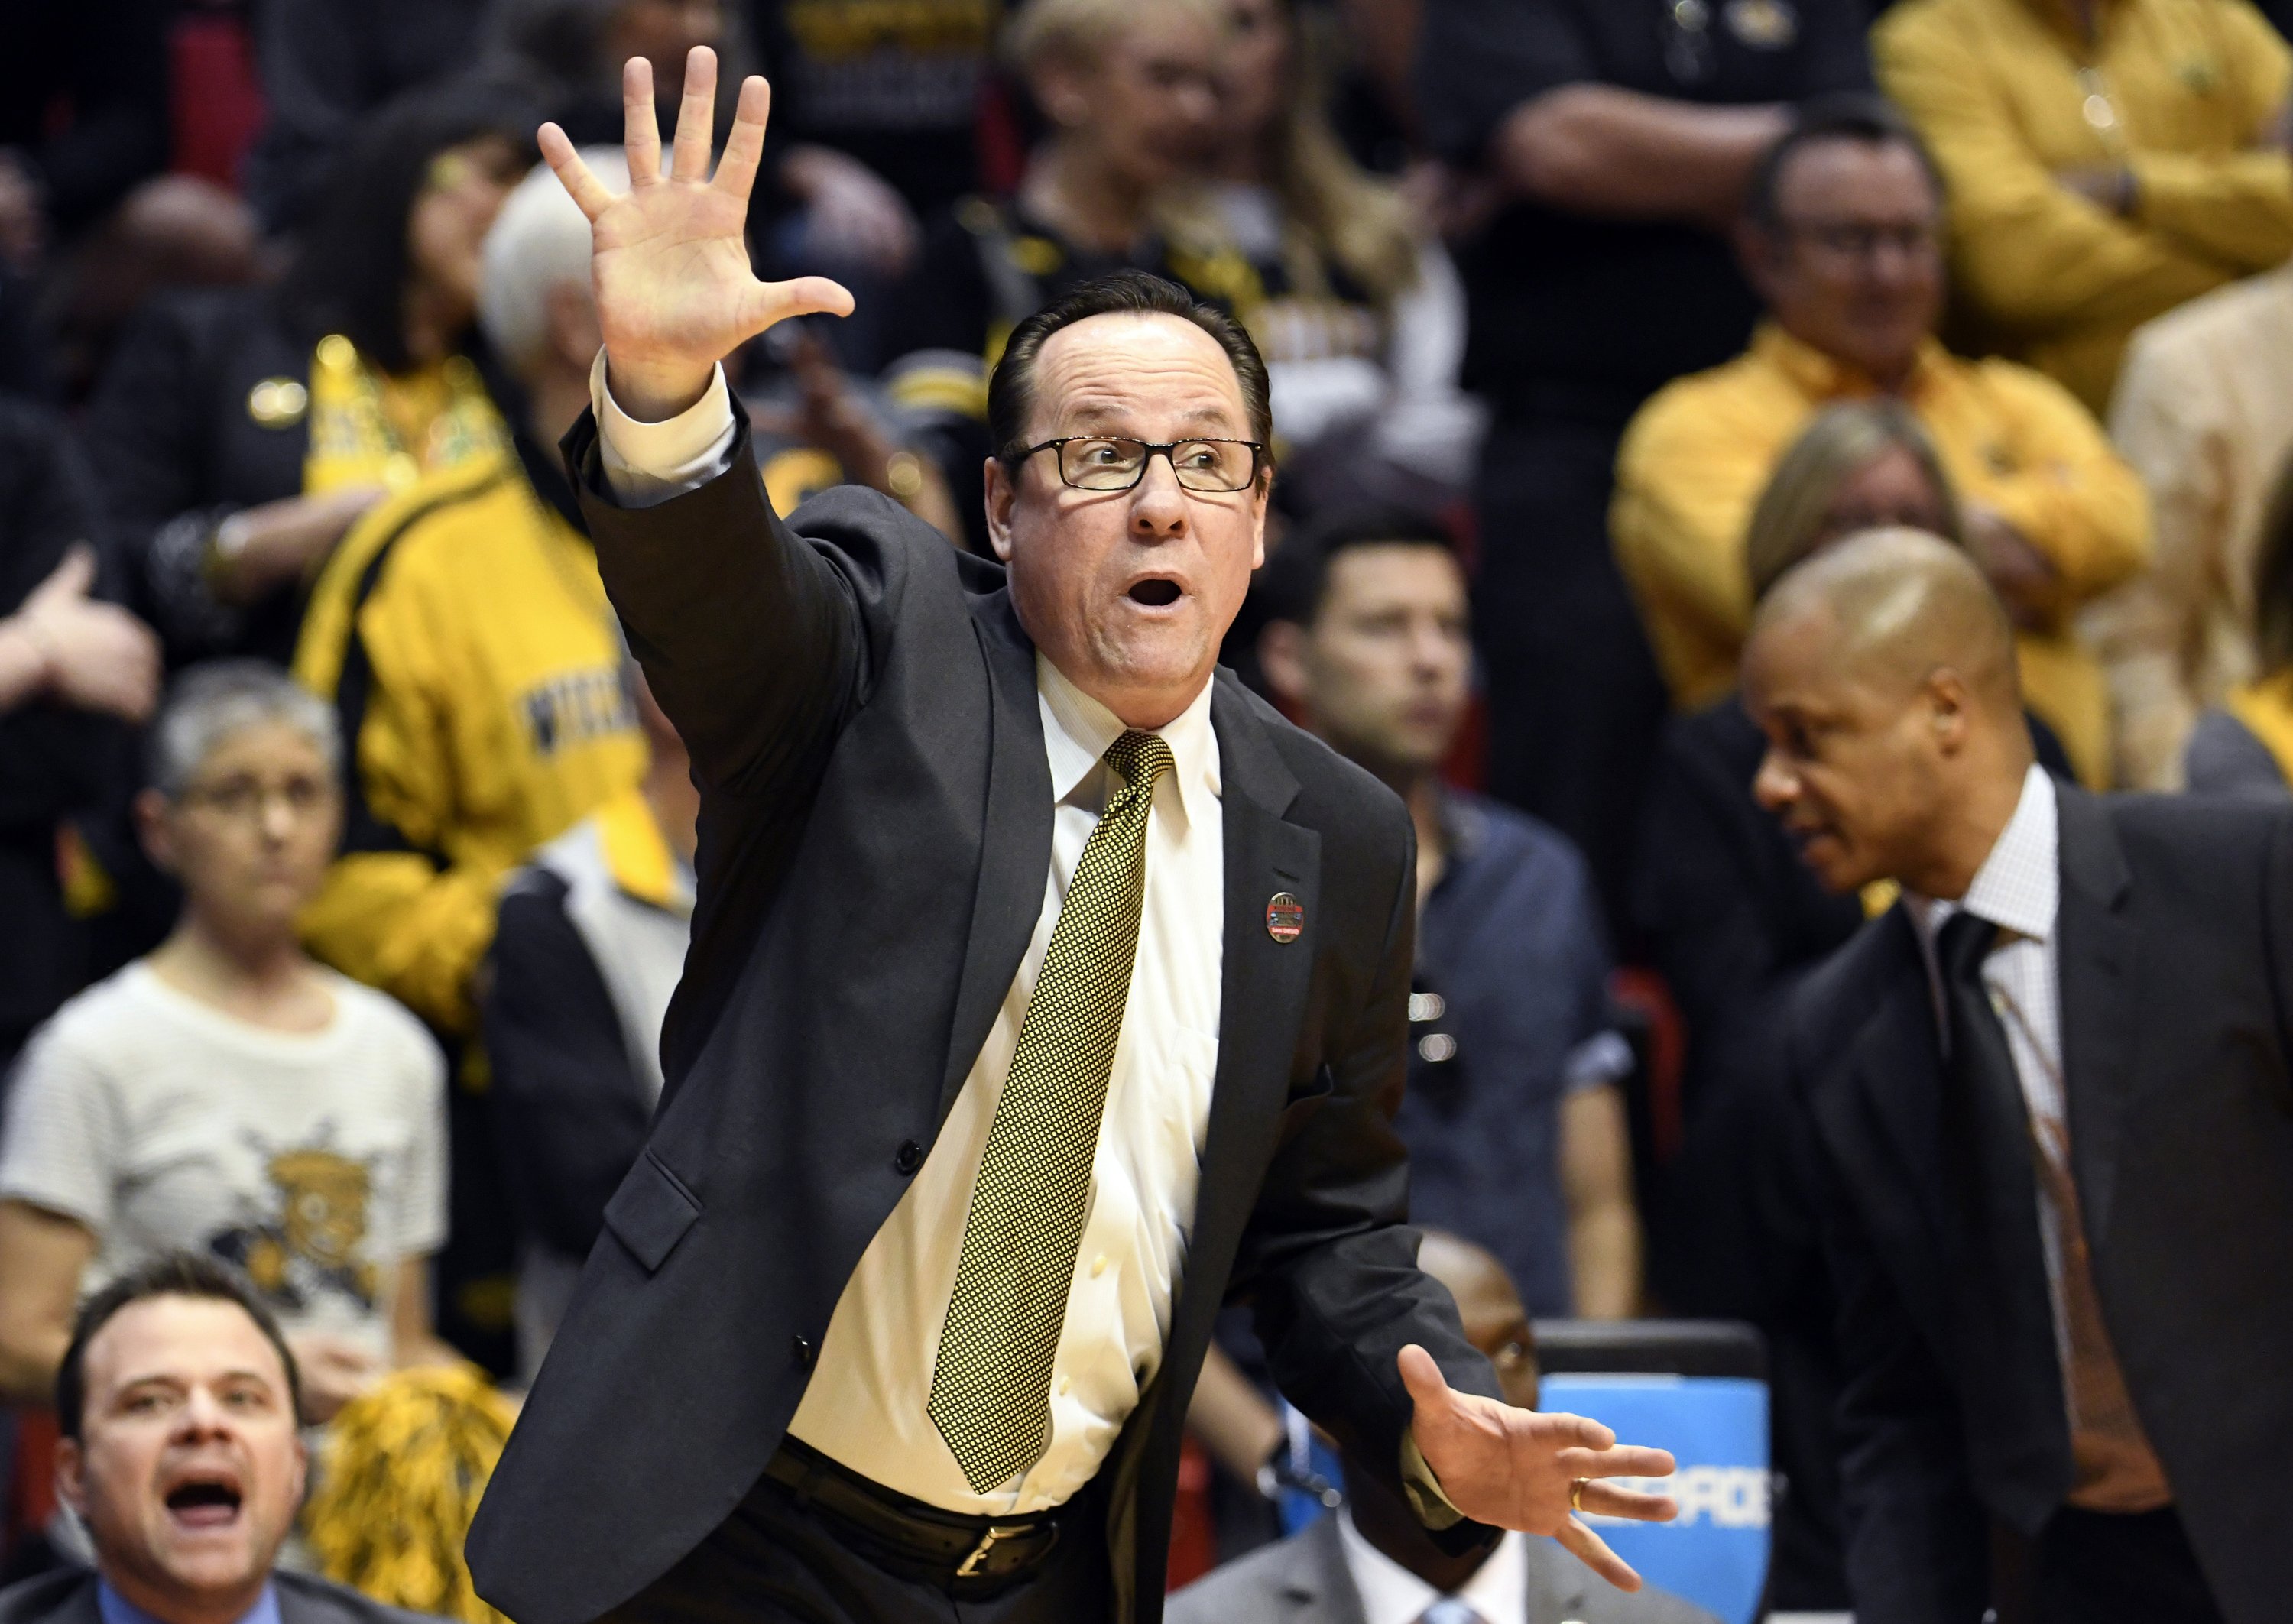 Wichita State coach Marshall resigns after misconduct probe | AP News